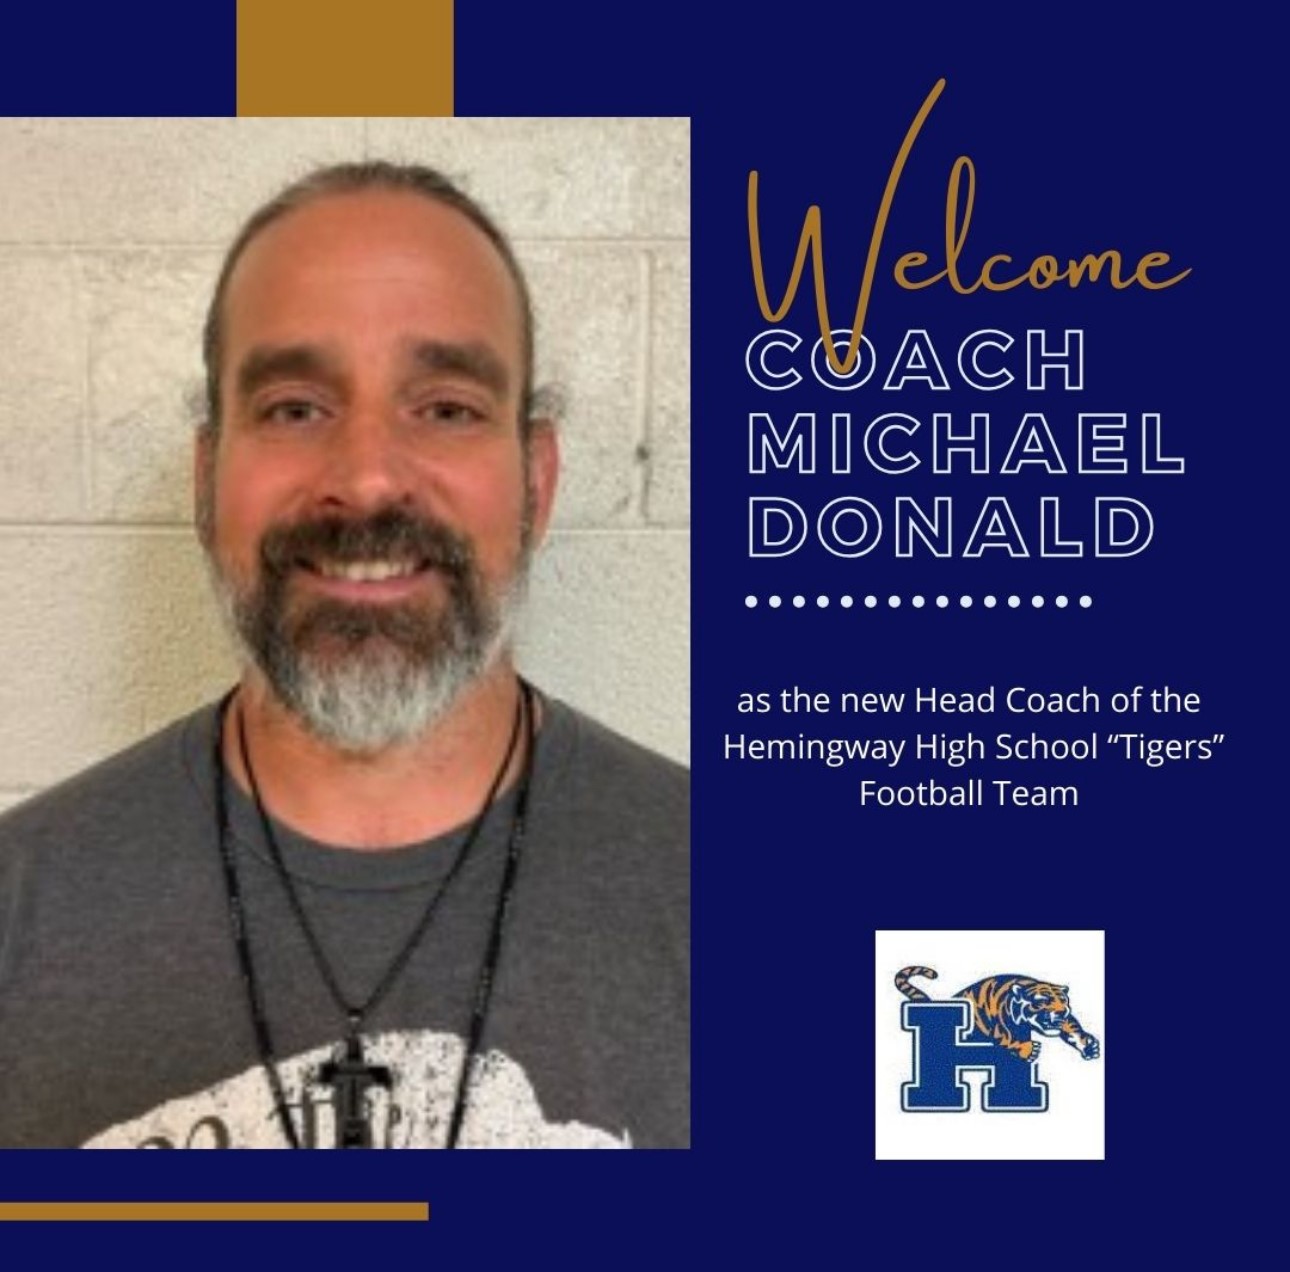 Picture of white male. Welcome coach Michael Donald as the new Head Coach of the Hemingway High School "Tigers" Football Team. Logo: H with Tiger Across the top